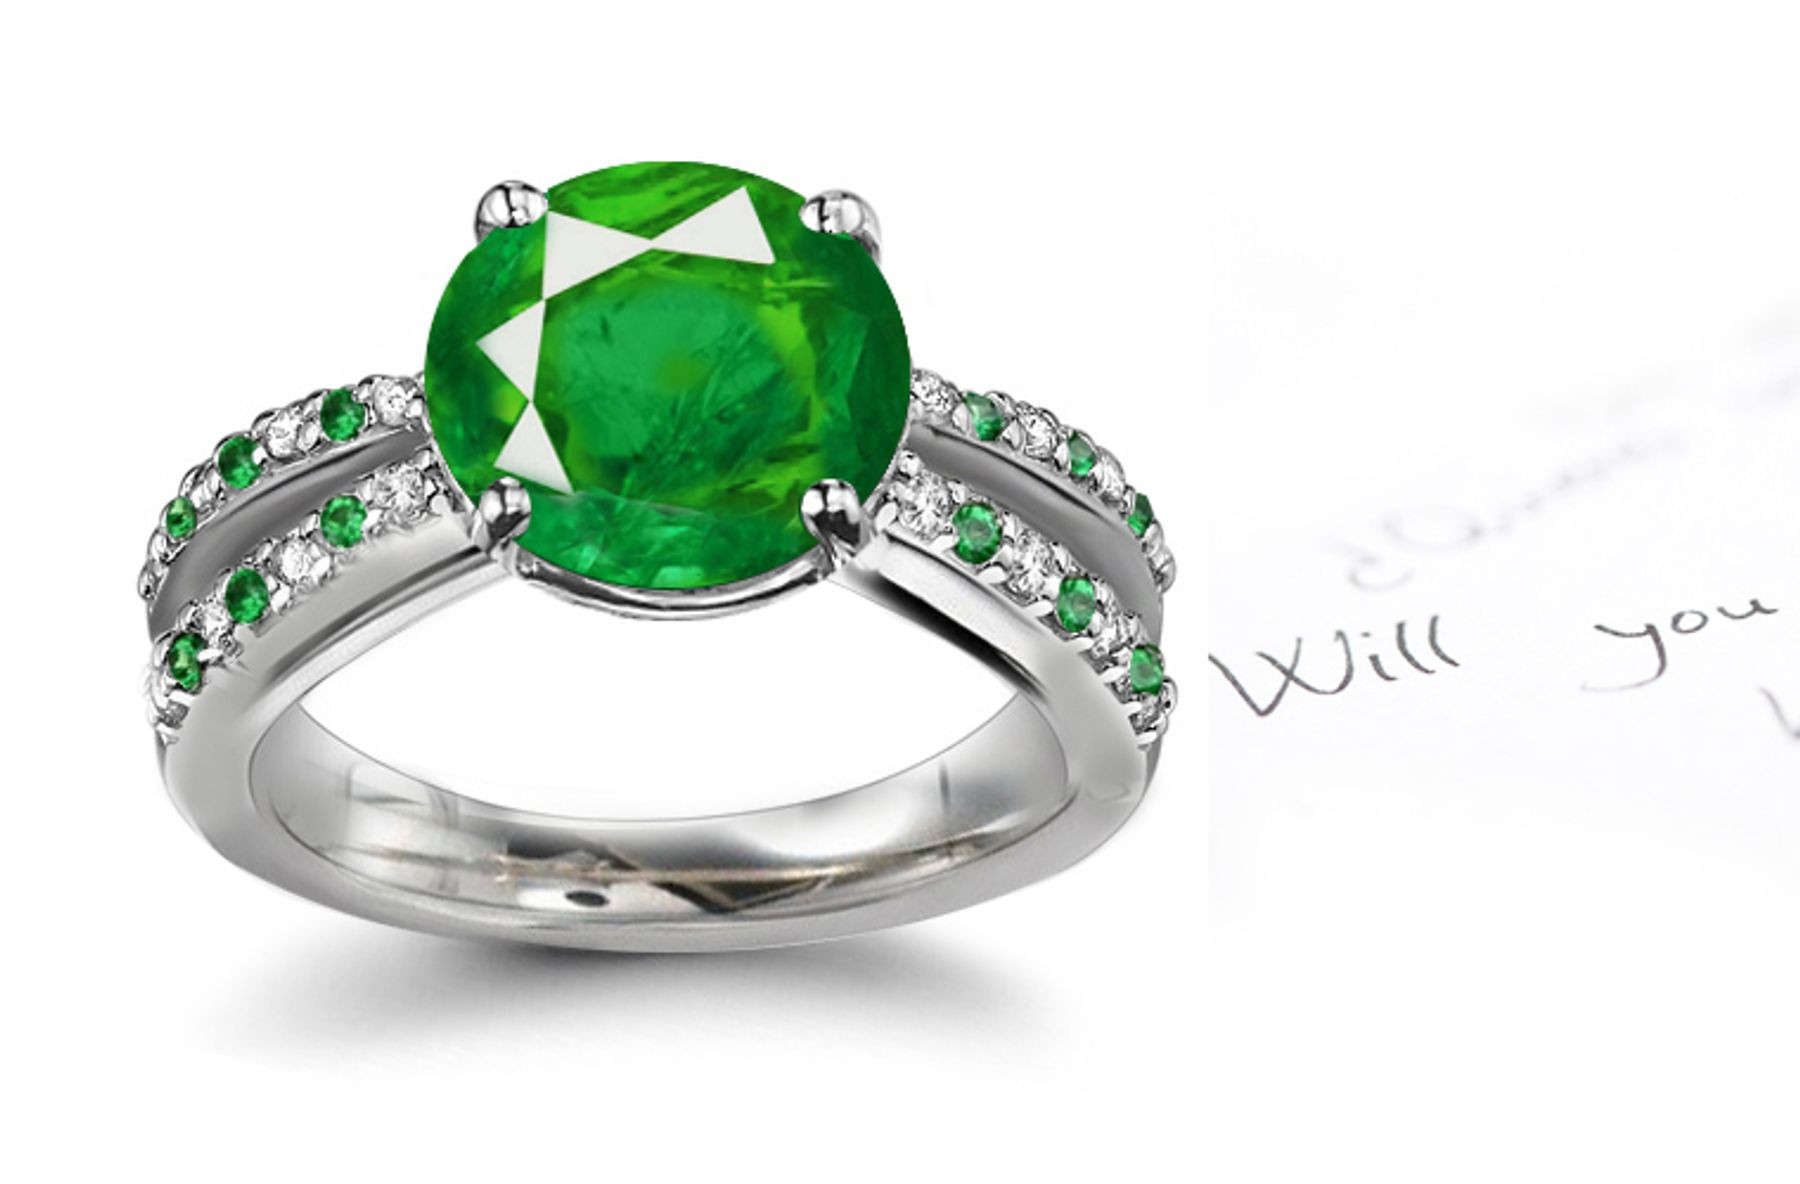 Blazing & Most Gorgeous: Split-Shank Emerald Cut Diamond Ring in 14k White Gold & Hammered Finish Platinum Withstand Blows